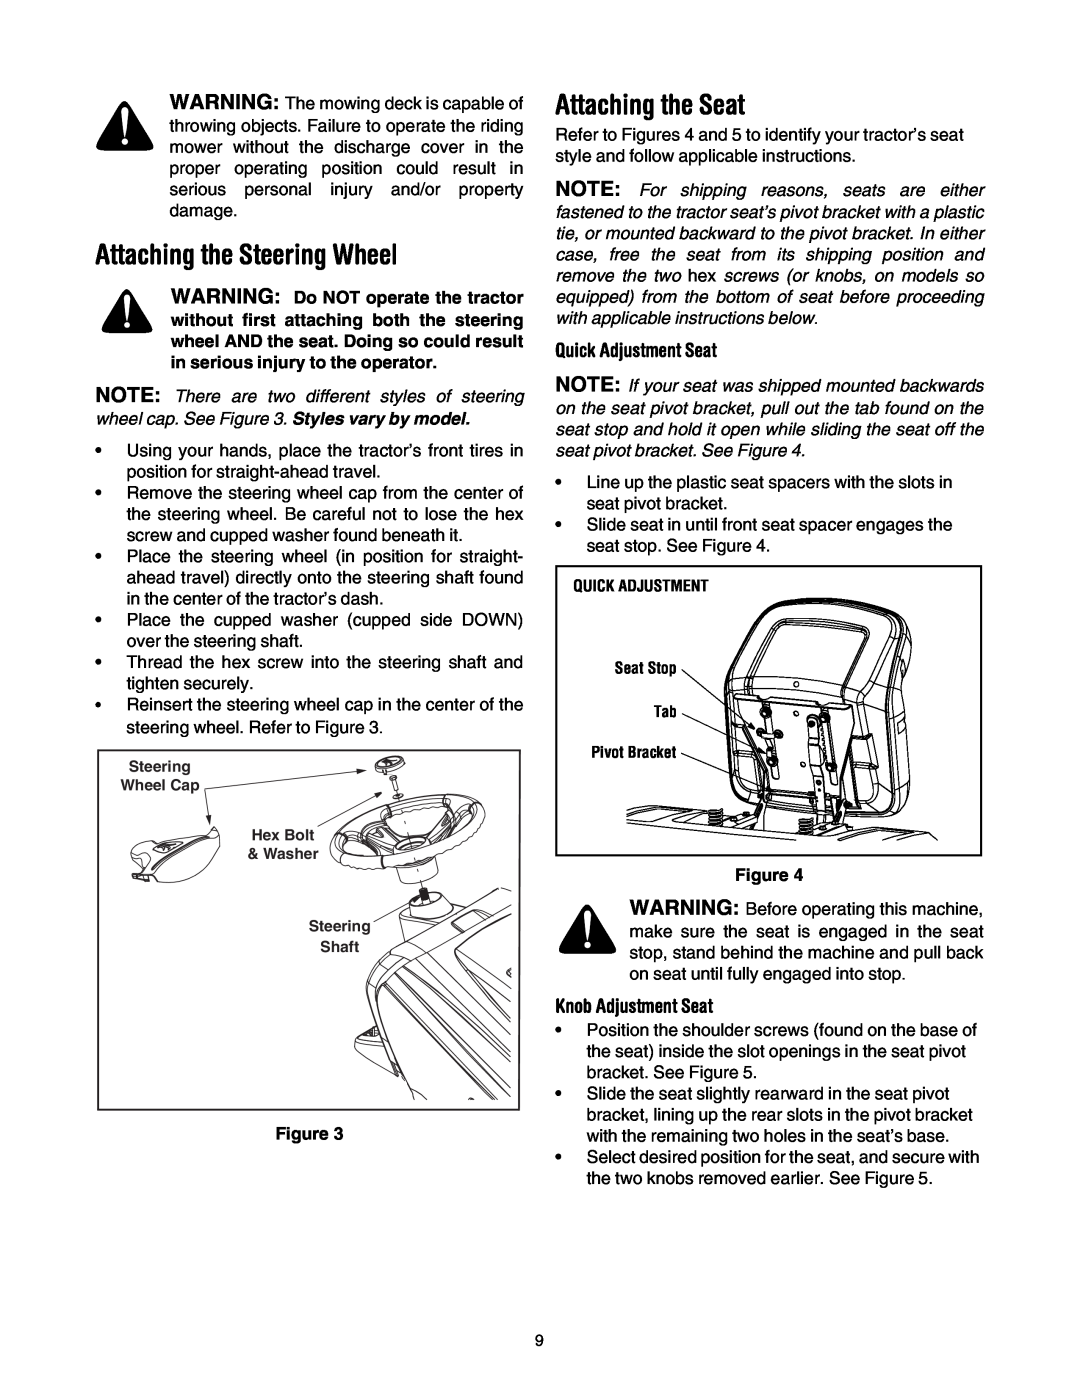 Troy-Bilt Automatic Lawn Tractor manual Attaching the Steering Wheel, Attaching the Seat, Quick Adjustment Seat 